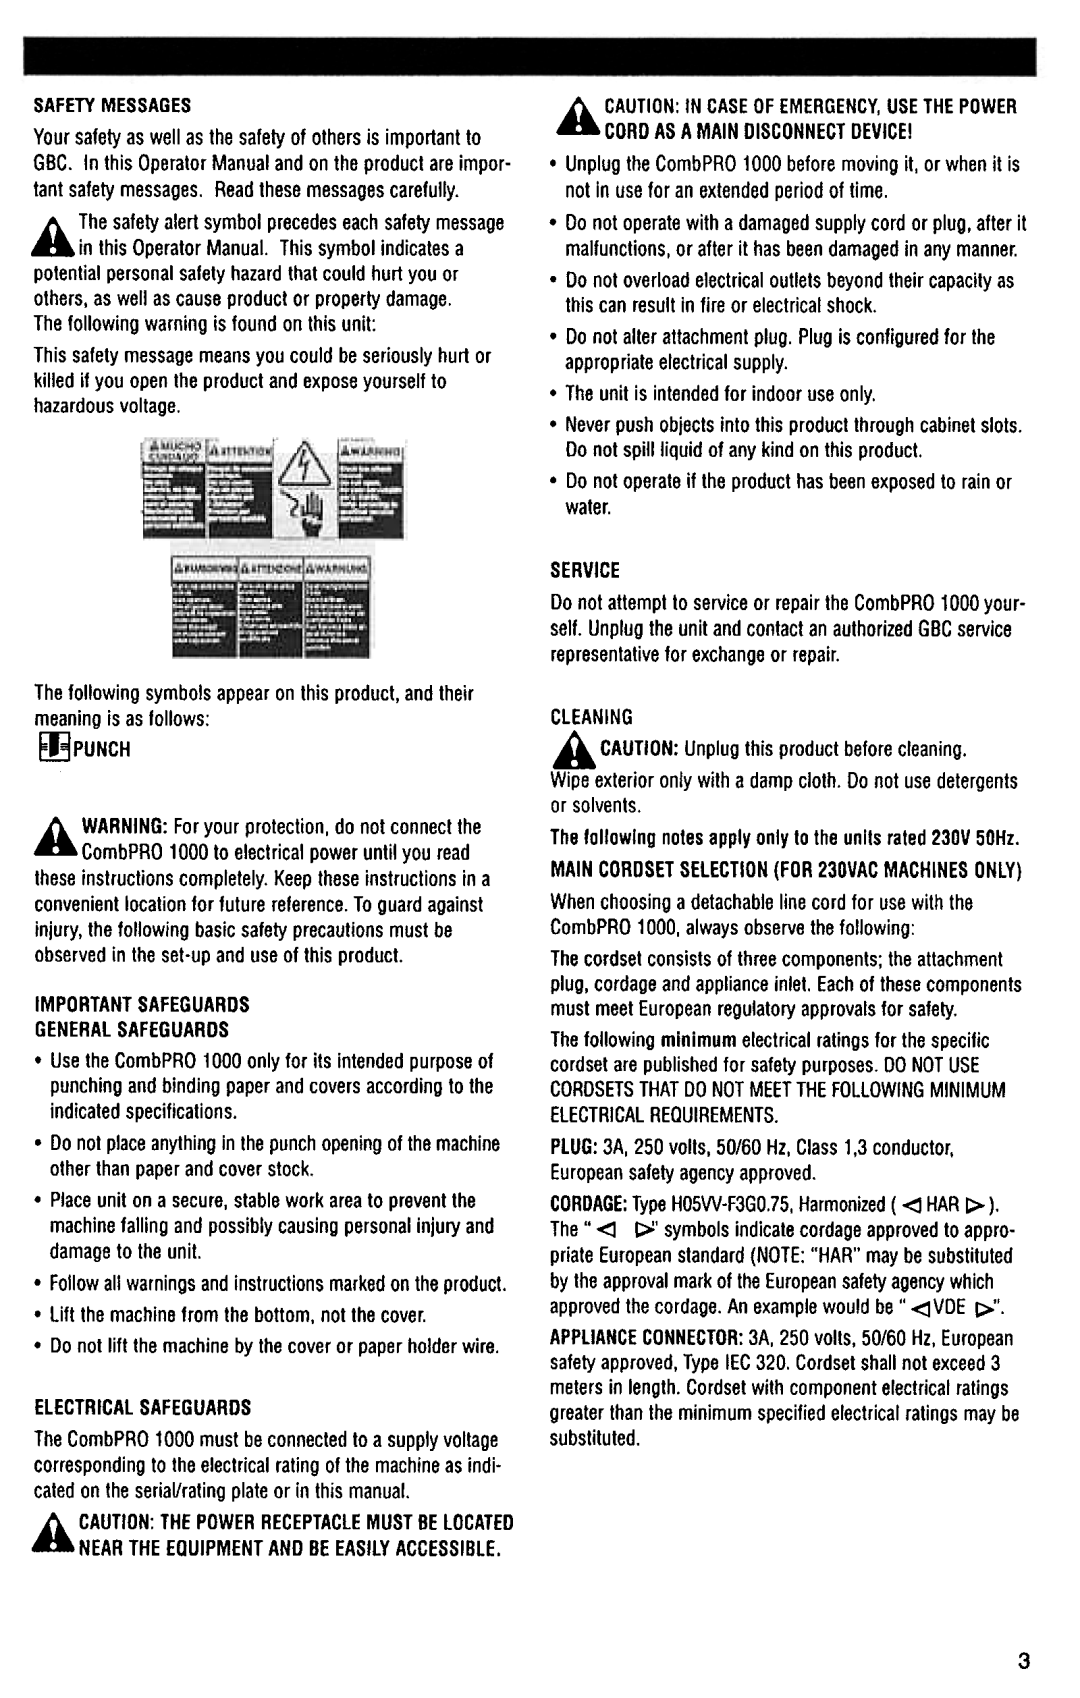 GBC COMBPRO1000 manual Safetymessages 